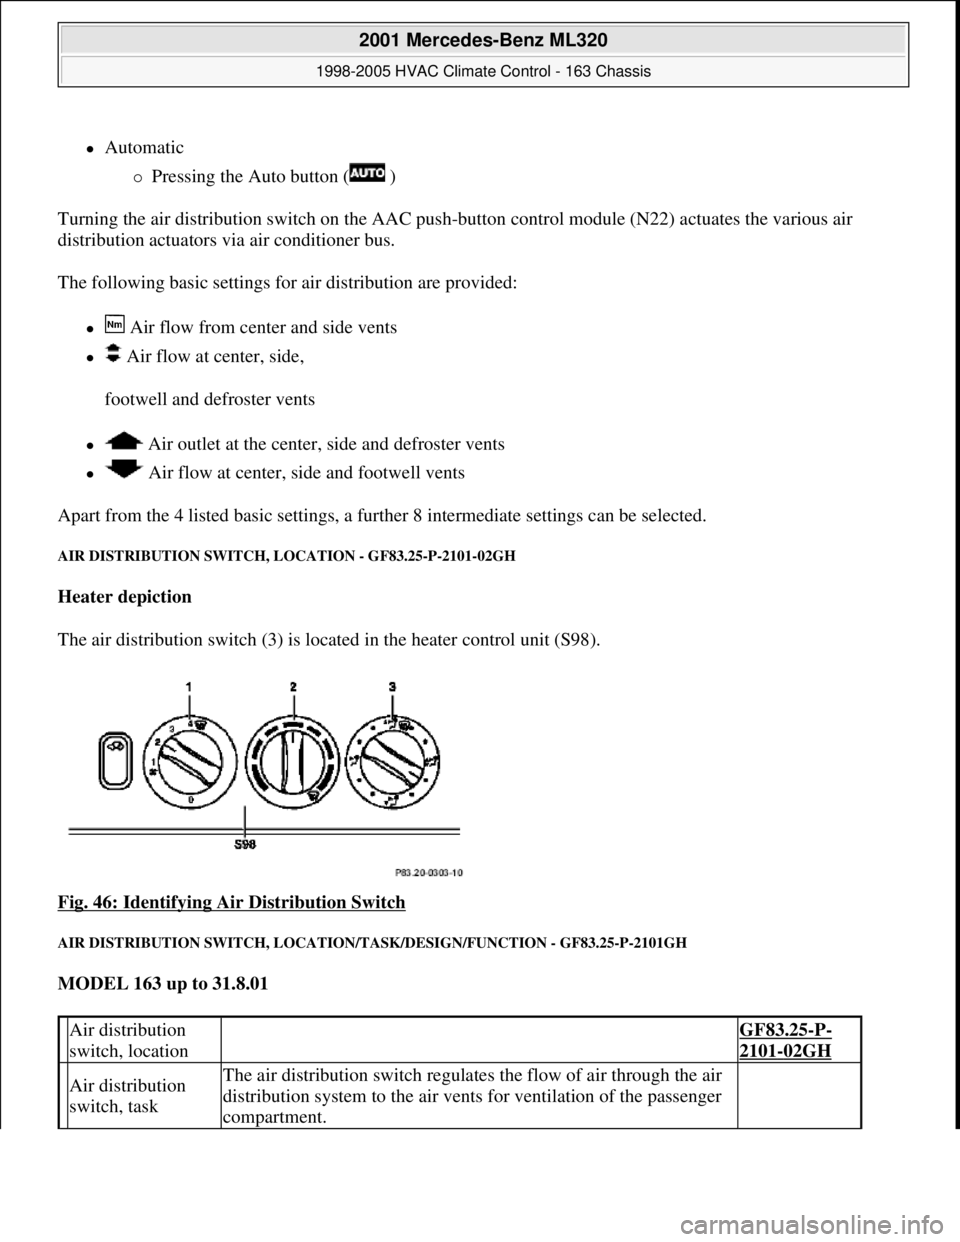 MERCEDES-BENZ ML350 1997  Complete Repair Manual Automatic 
Pressing the Auto button (  )   
Turning the air distribution switch   on the AAC push-button control modul e (N22) actuates the various air  
distribution actuators   via air conditi